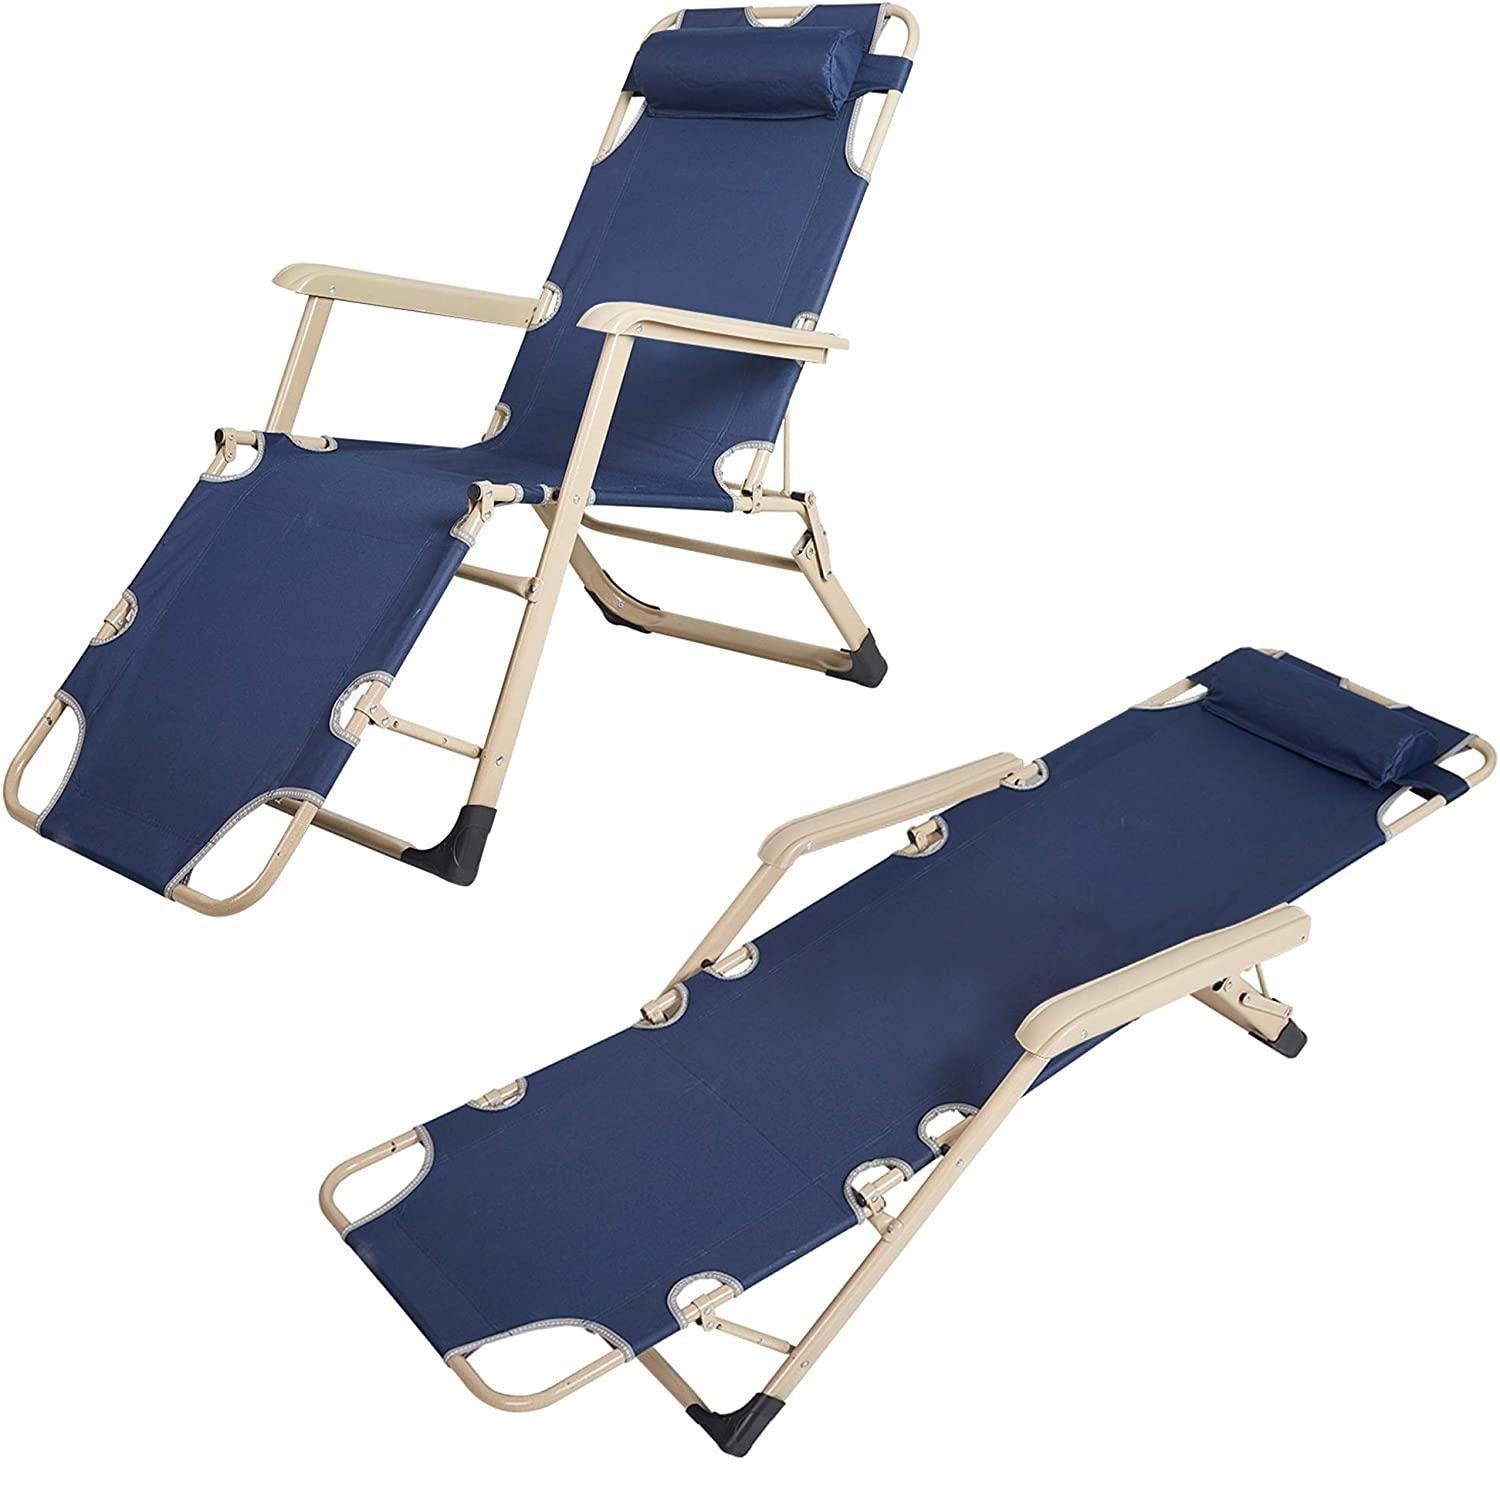 Outdoor Reclining Lawn Chairs Set of 2 Adjustable Folding Patio Recliners with Pillow for Pool Lawn Beach